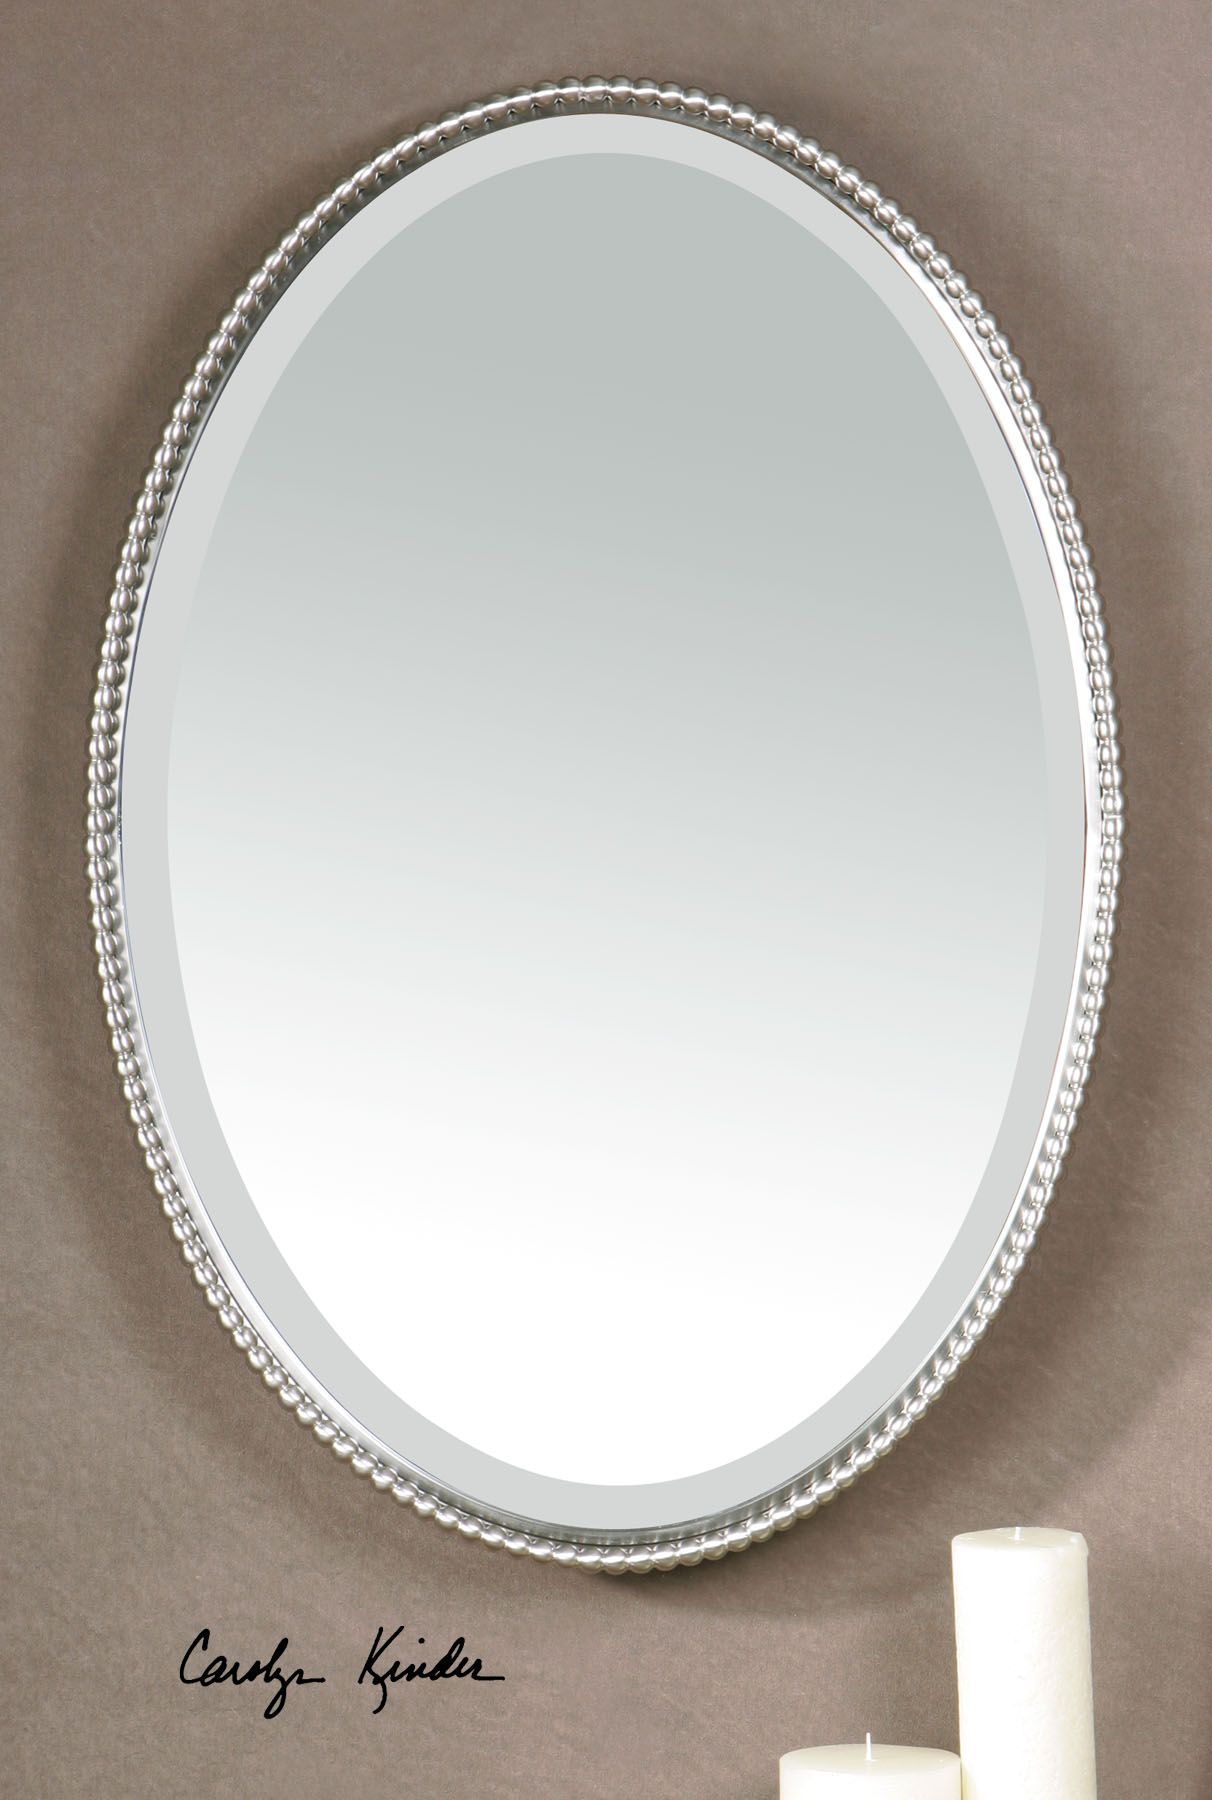 Silver Nickel Beaded Edge Oval Wall Mirror 32" Vanity Bathroom Horchow Inside Silver Oval Wall Mirrors (View 2 of 15)